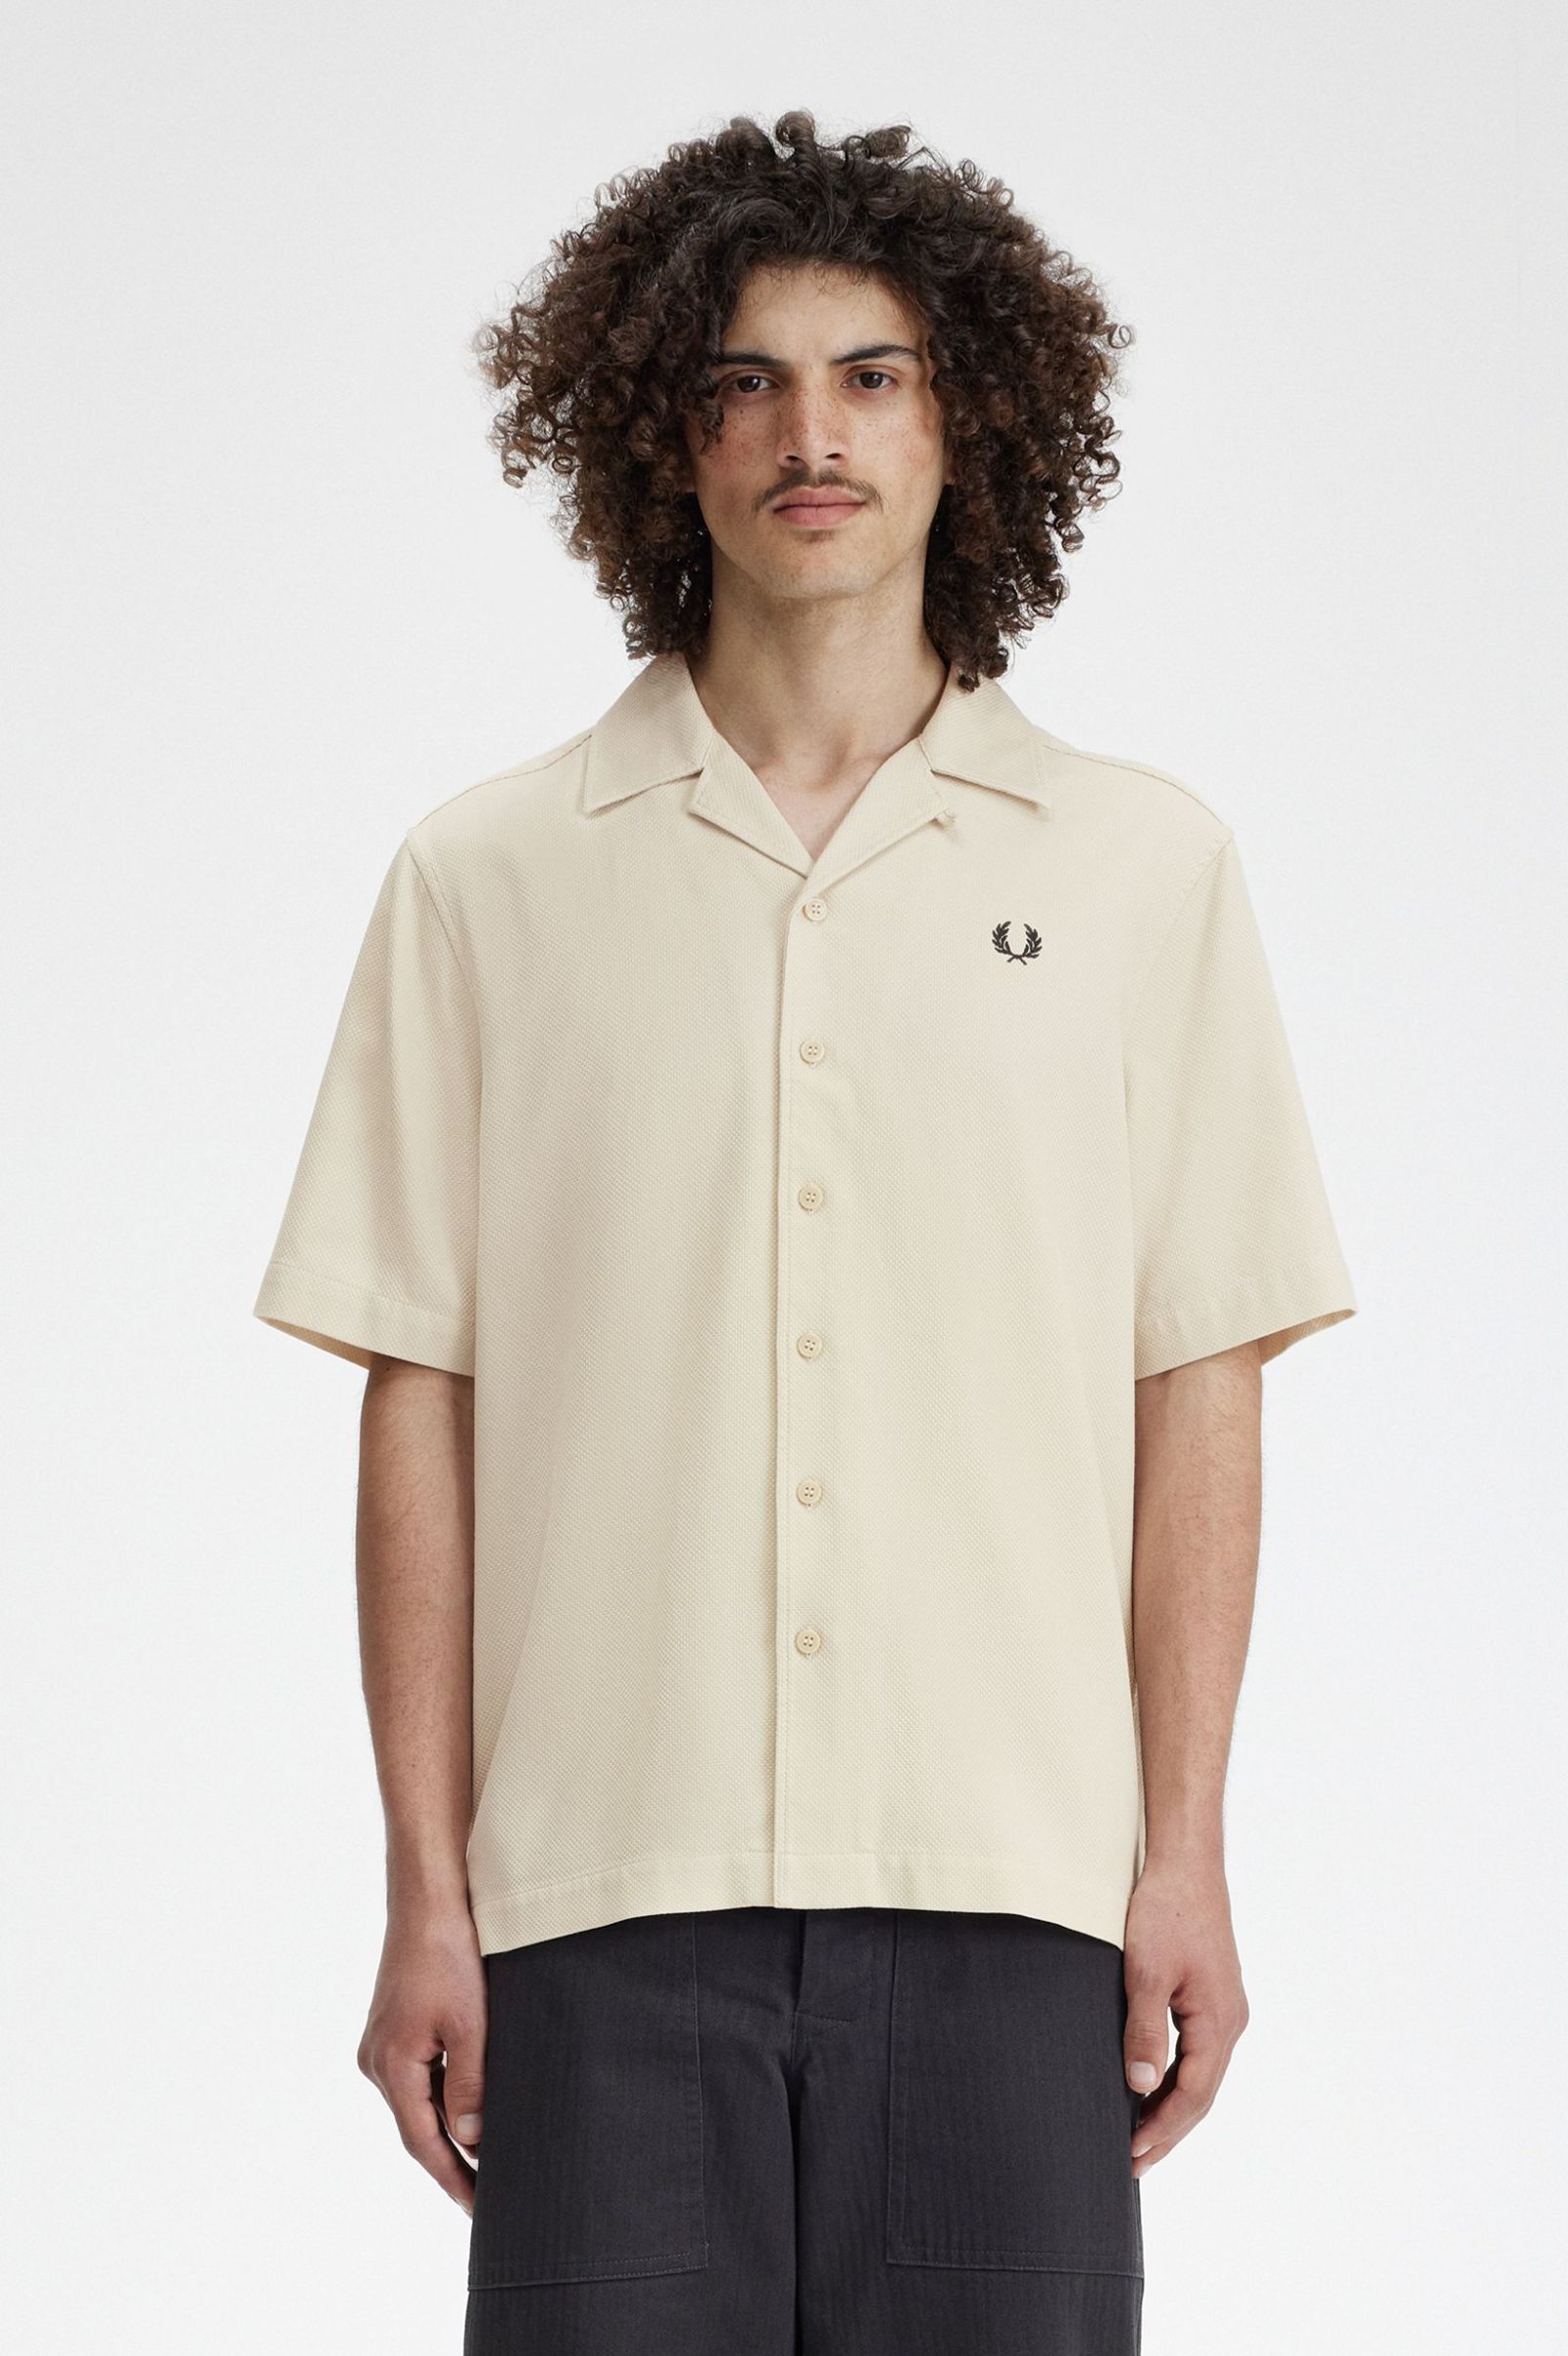 Fred Perry Piqué Texture Revere Collar Shirt in Oatmeal